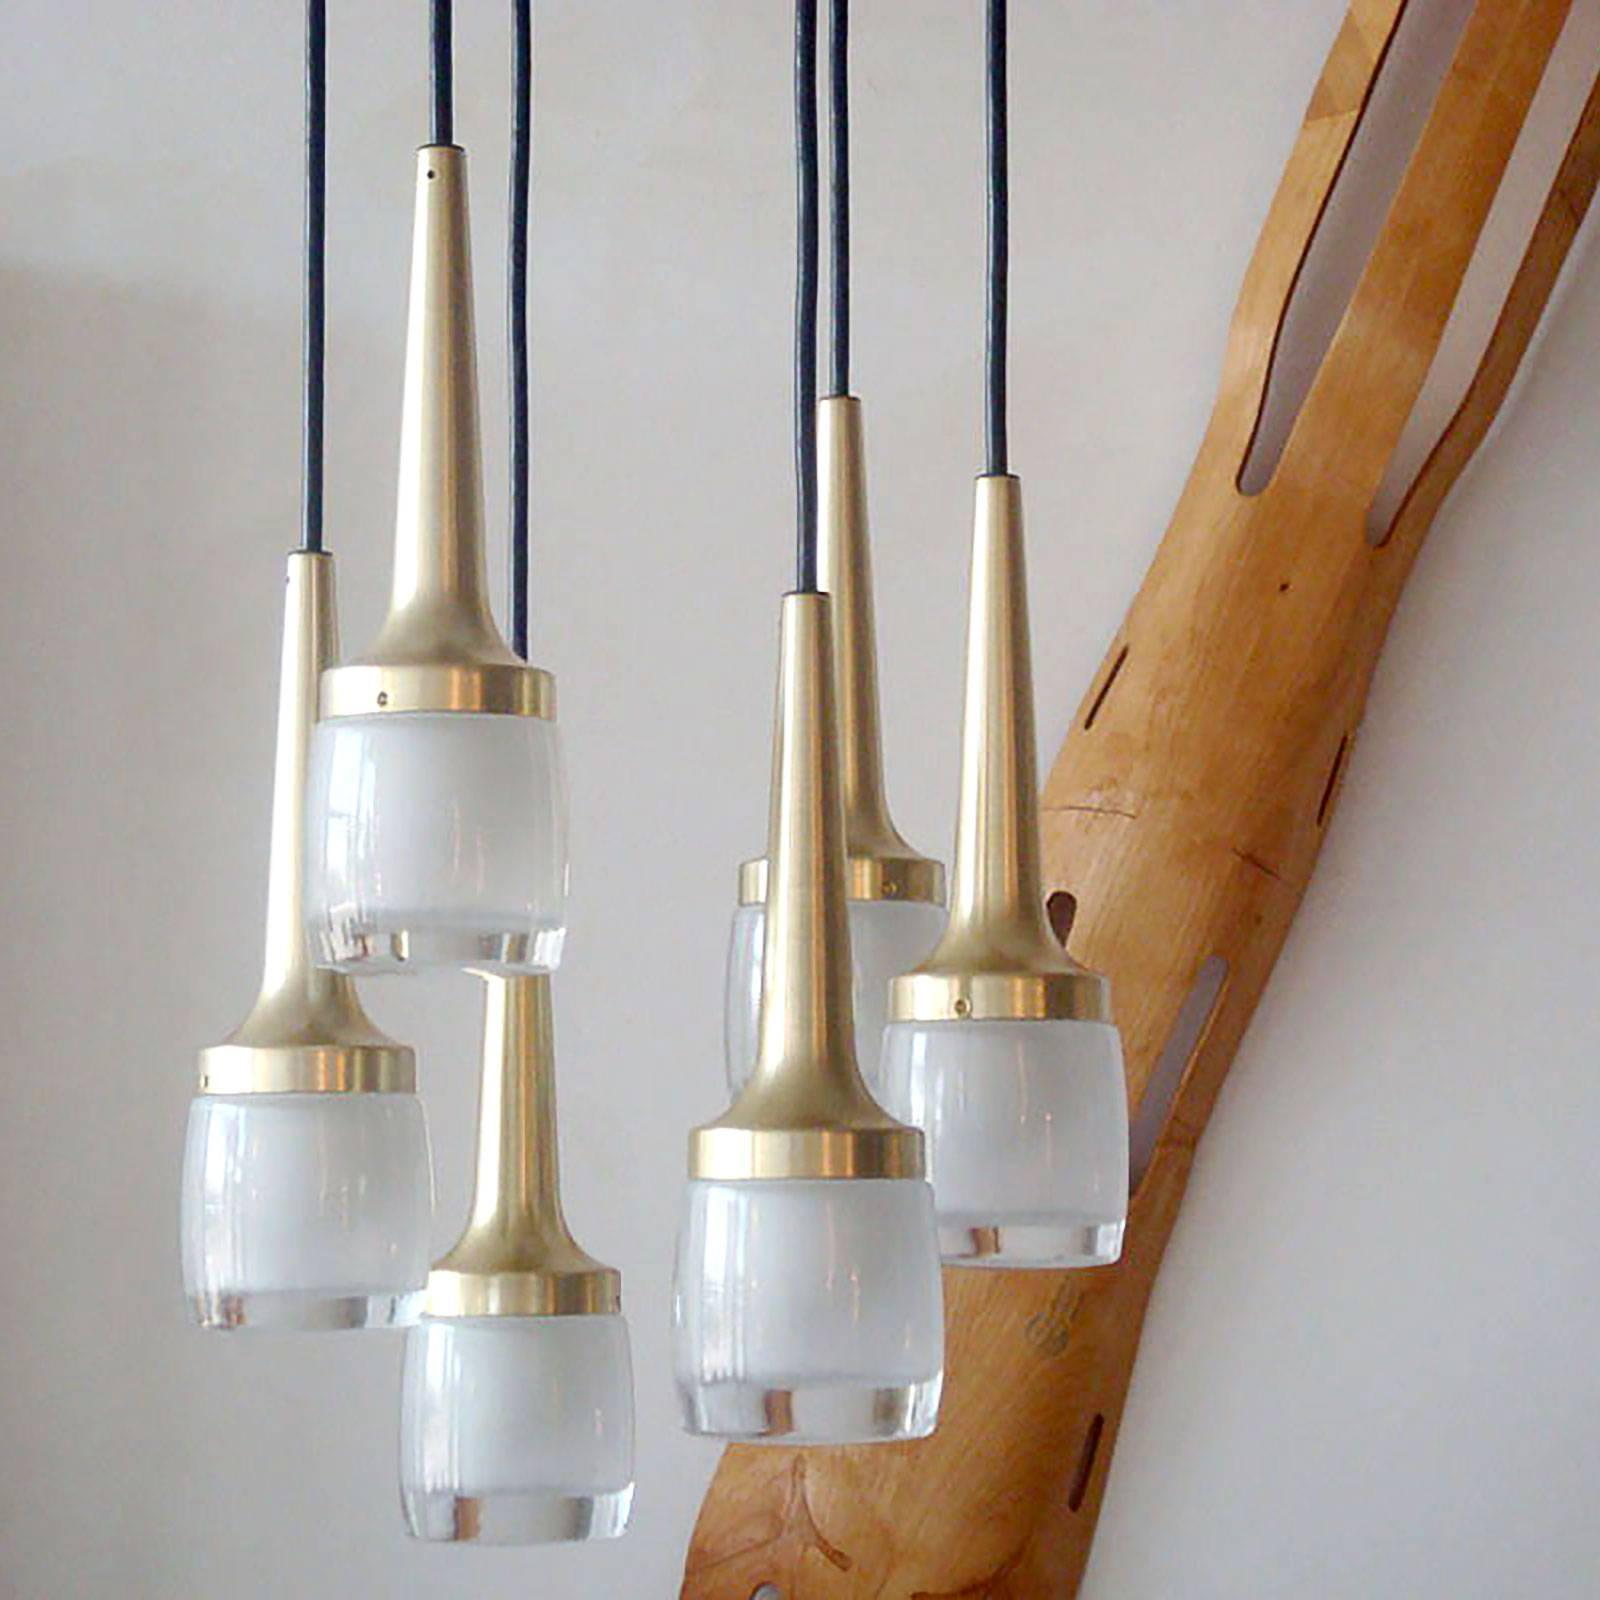 Stunning chandelier by Staff Leuchten, Germany with six brushed bras-plated hanging lights encased in heavy molded glass with inside frosting, lengths and configuration adjustable, currently in a matching square brass-plated canopy, wired for US